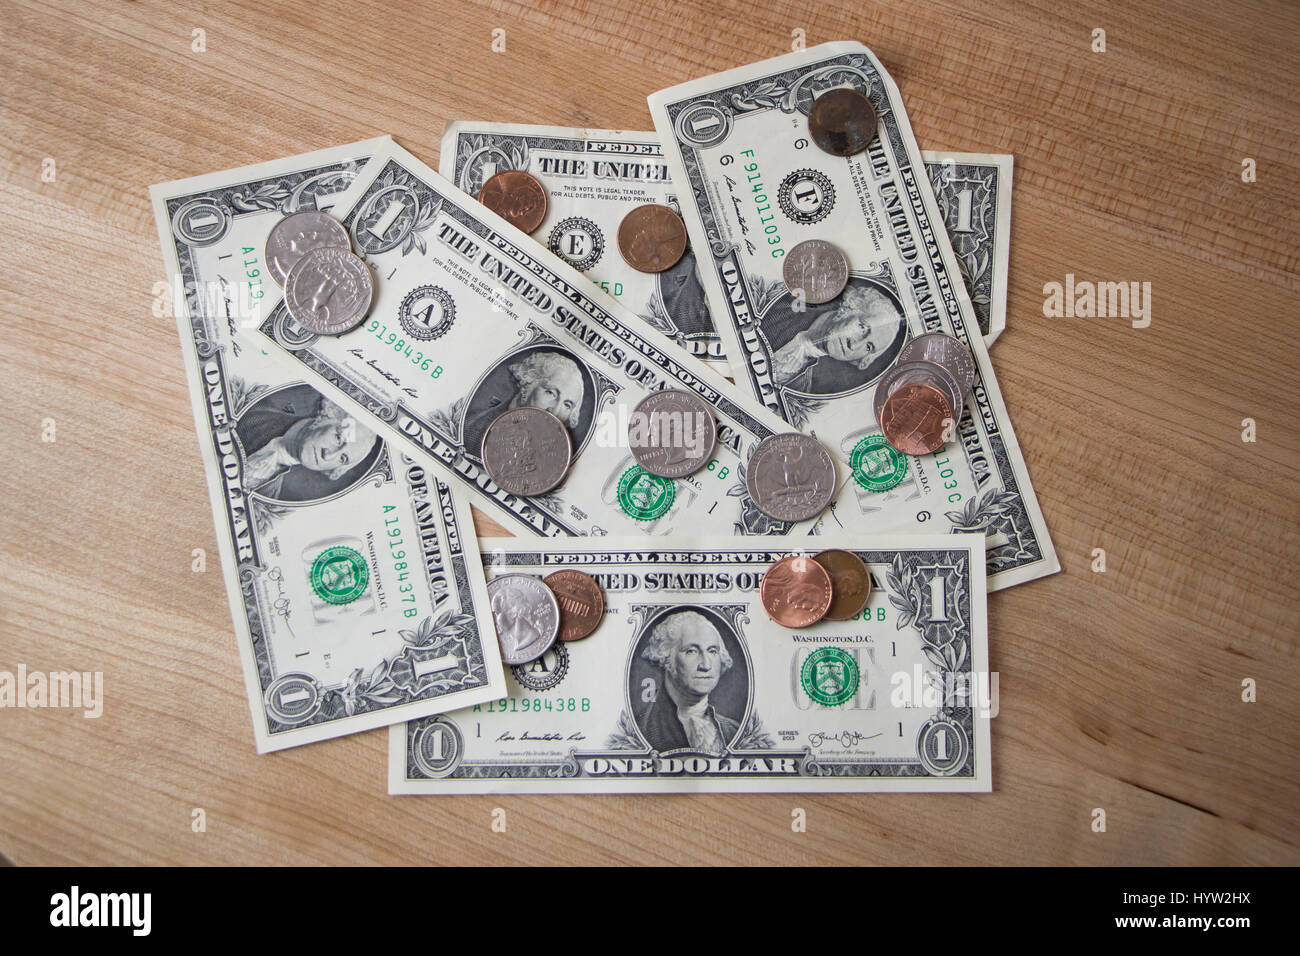 Pile of Various American Currency Stock Photo